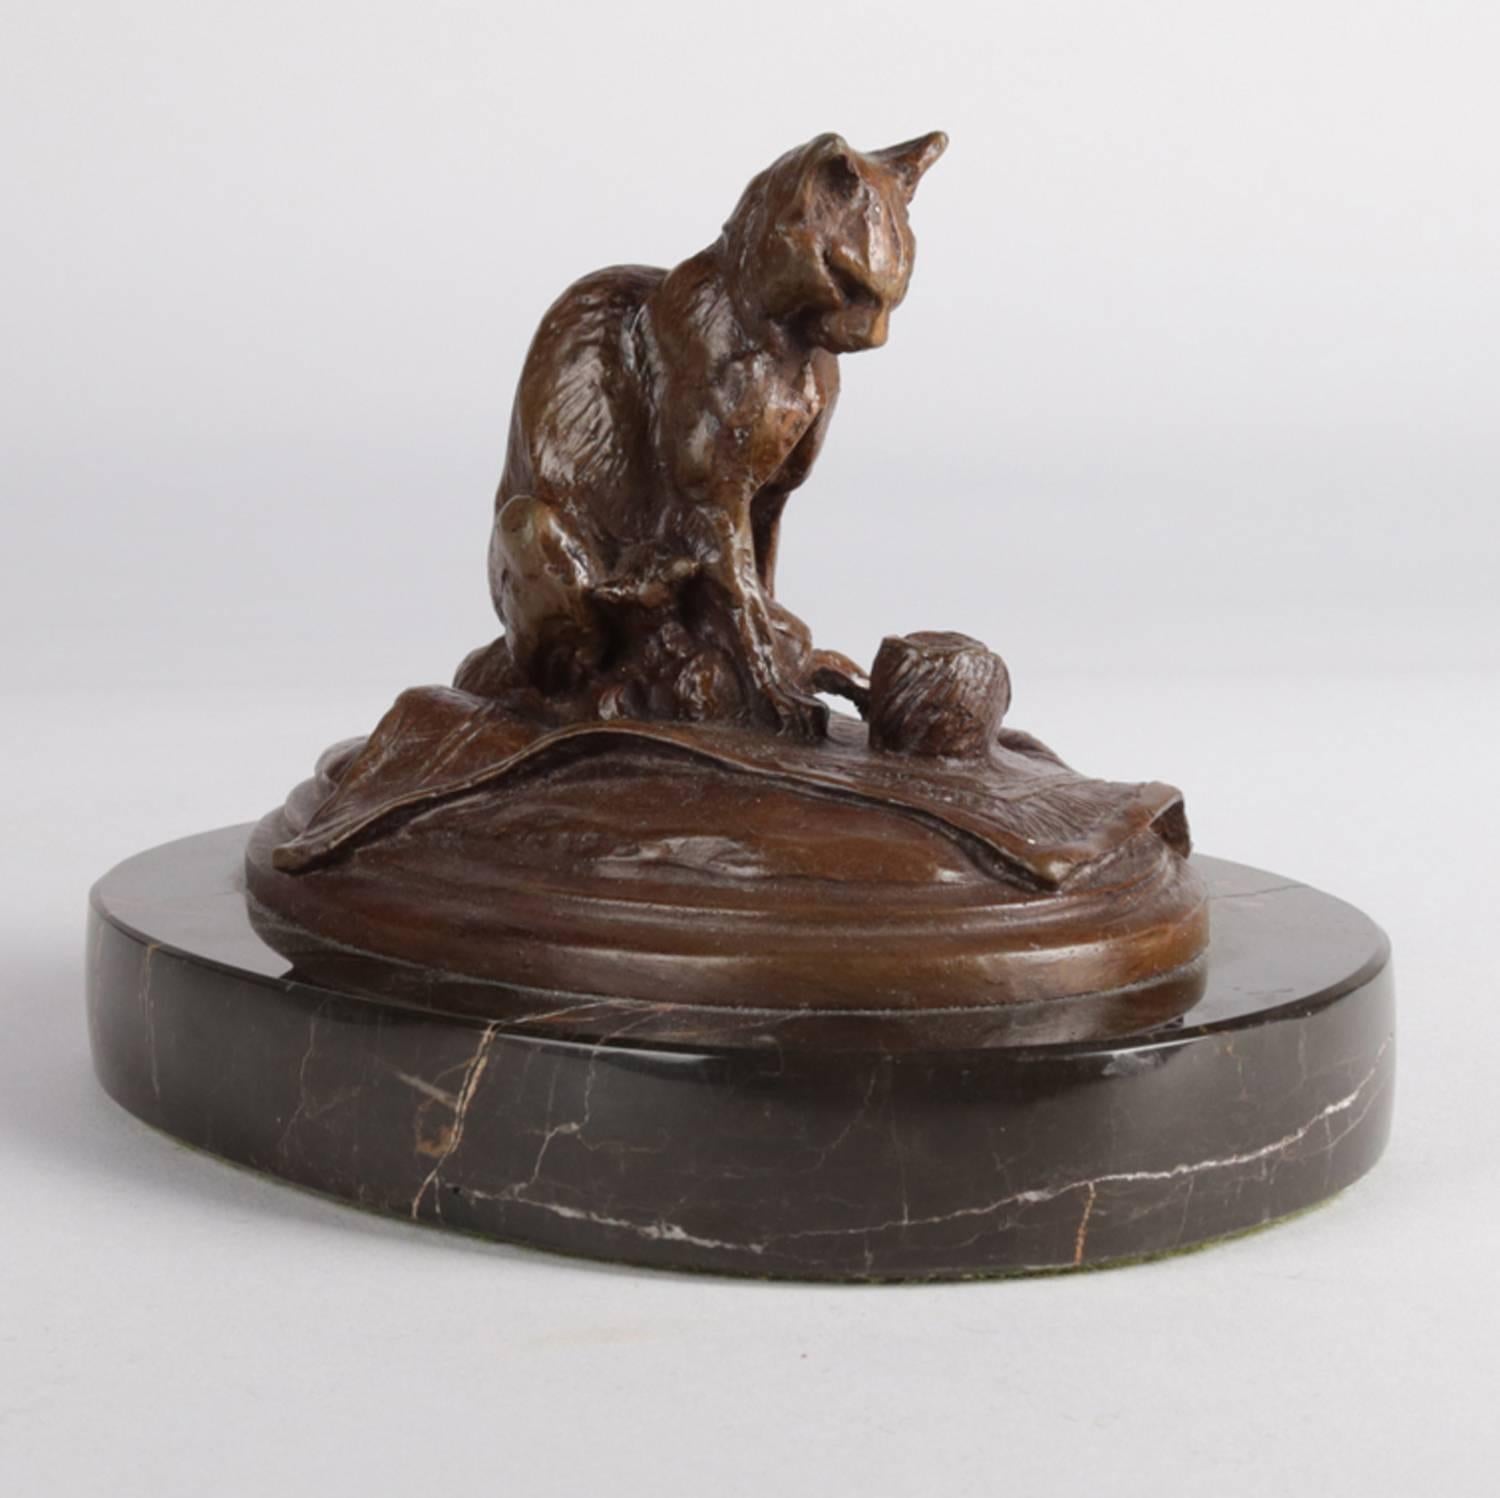 Figural casts bronze sculpture of kitten with ball of yarn, seated on bronze base, 20th century

Measures: 5